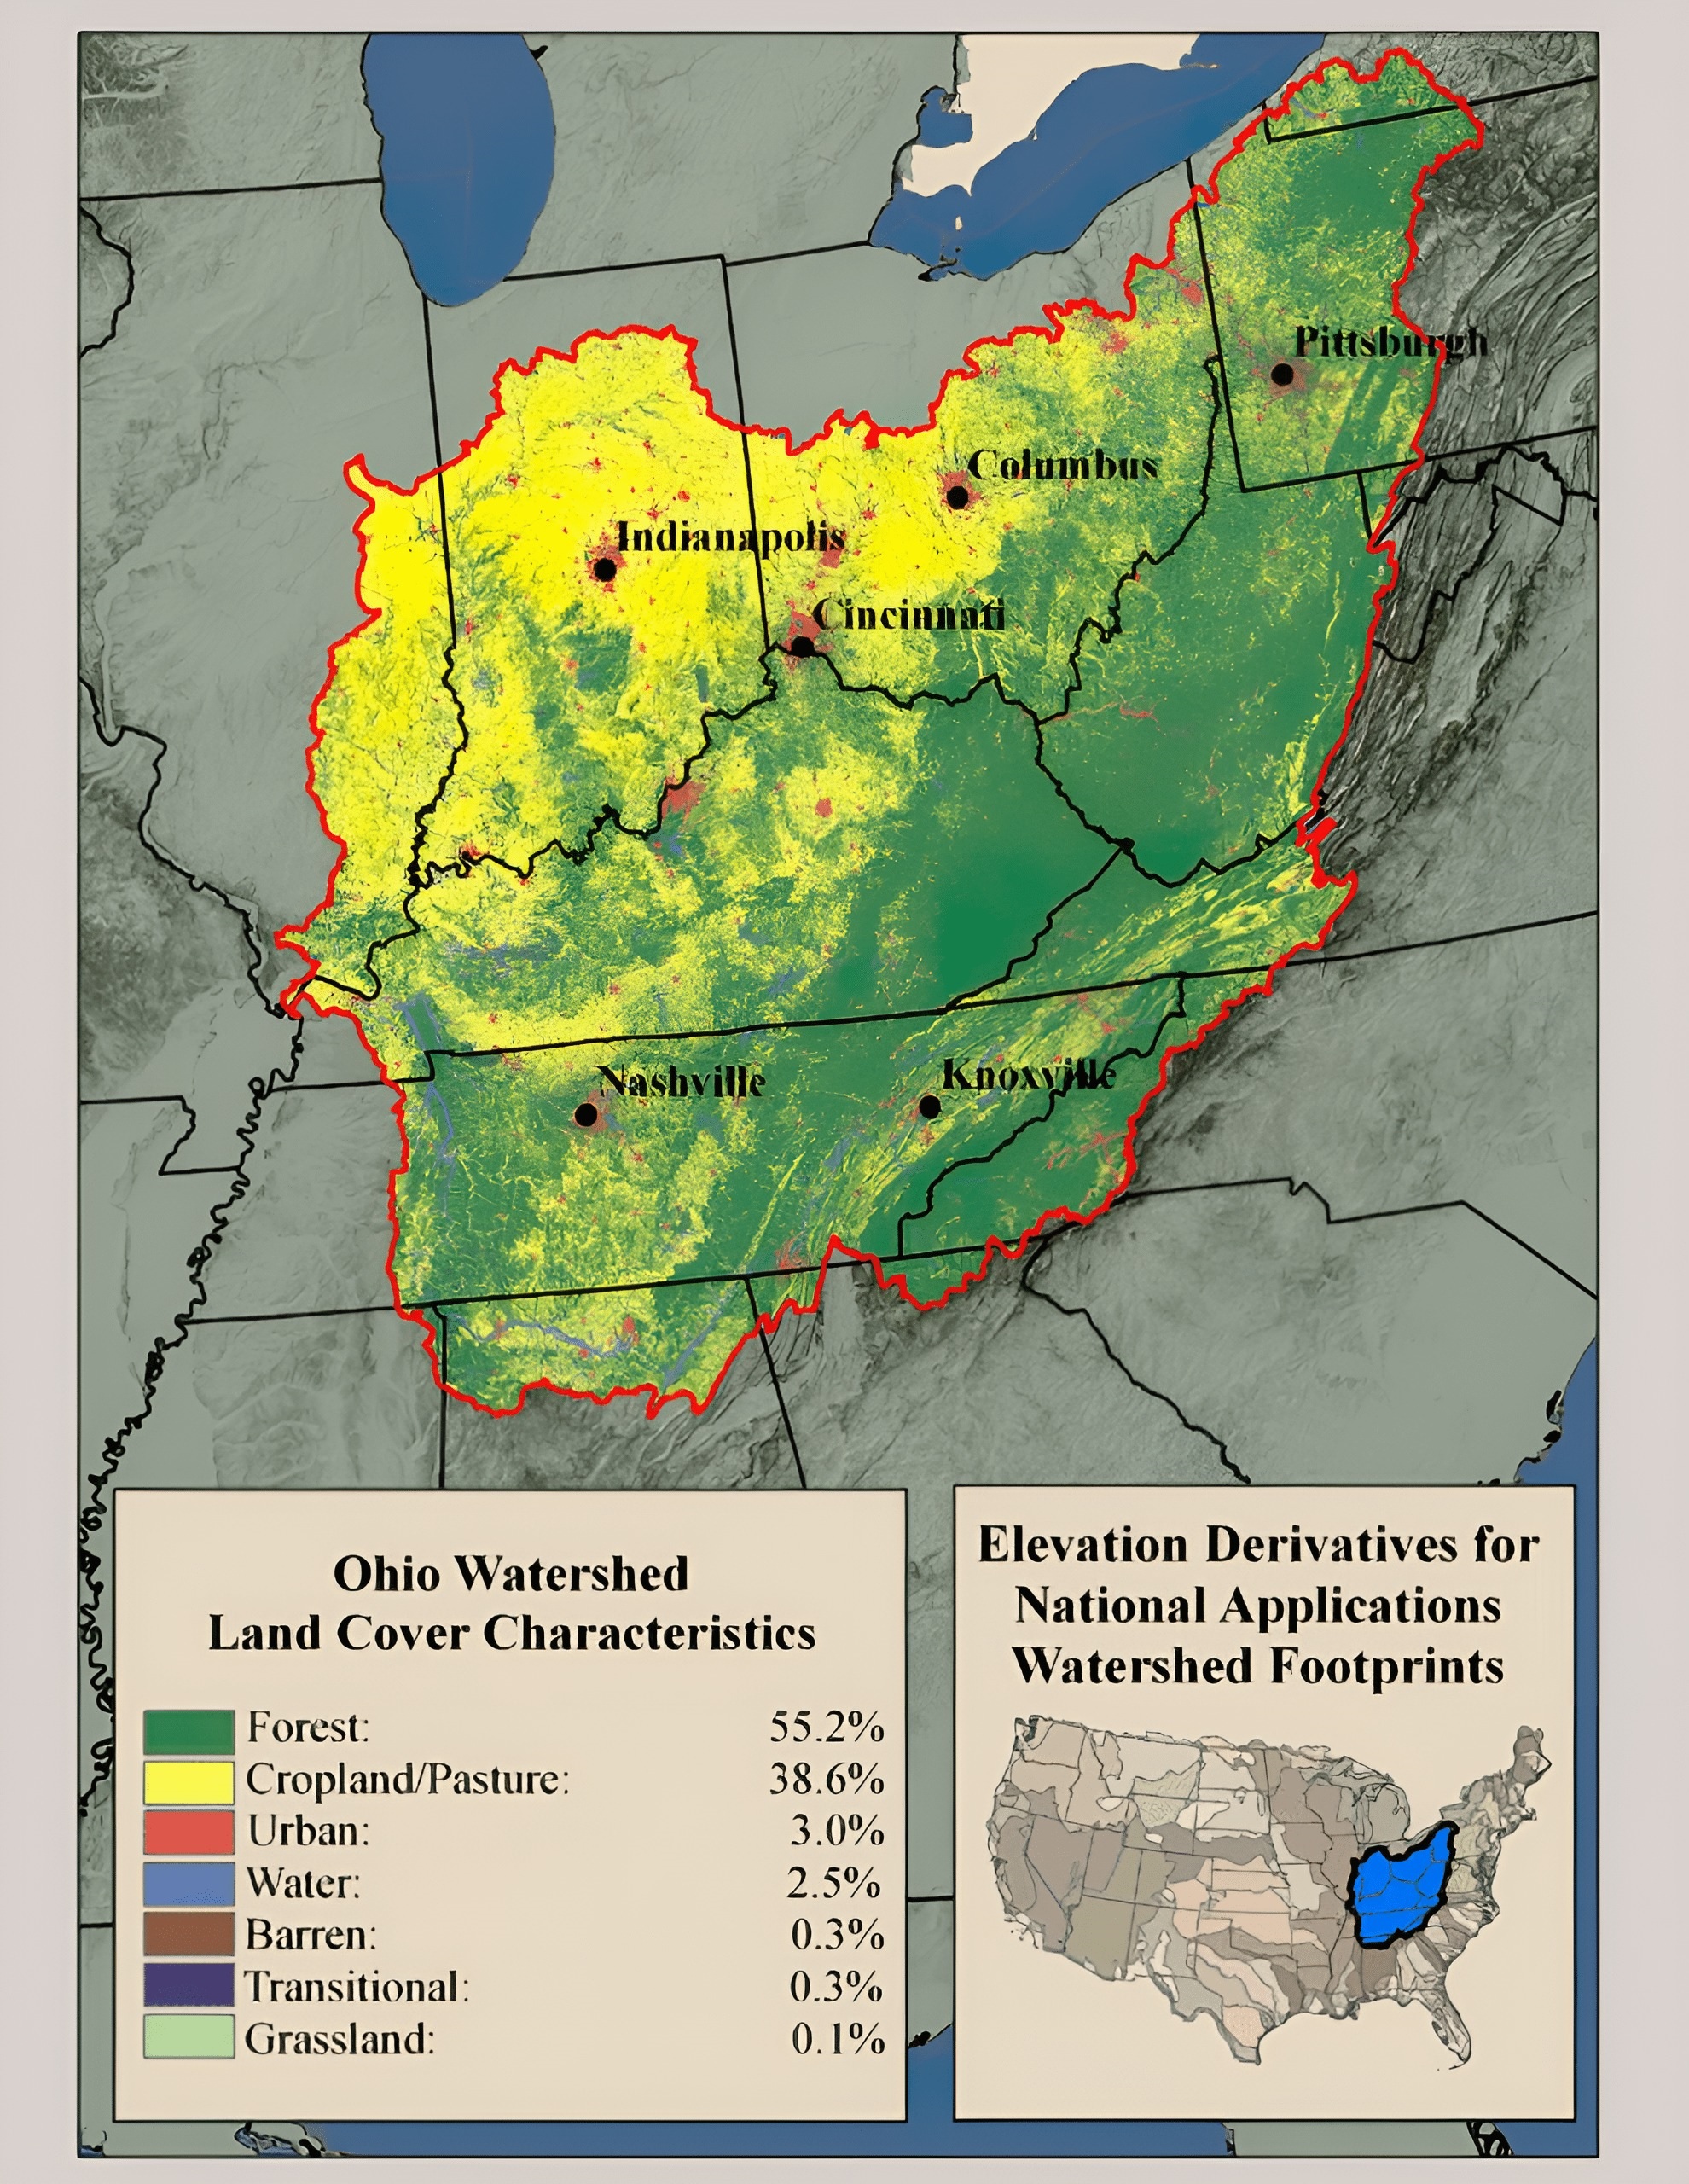 Ohio Watershed Land Percentages